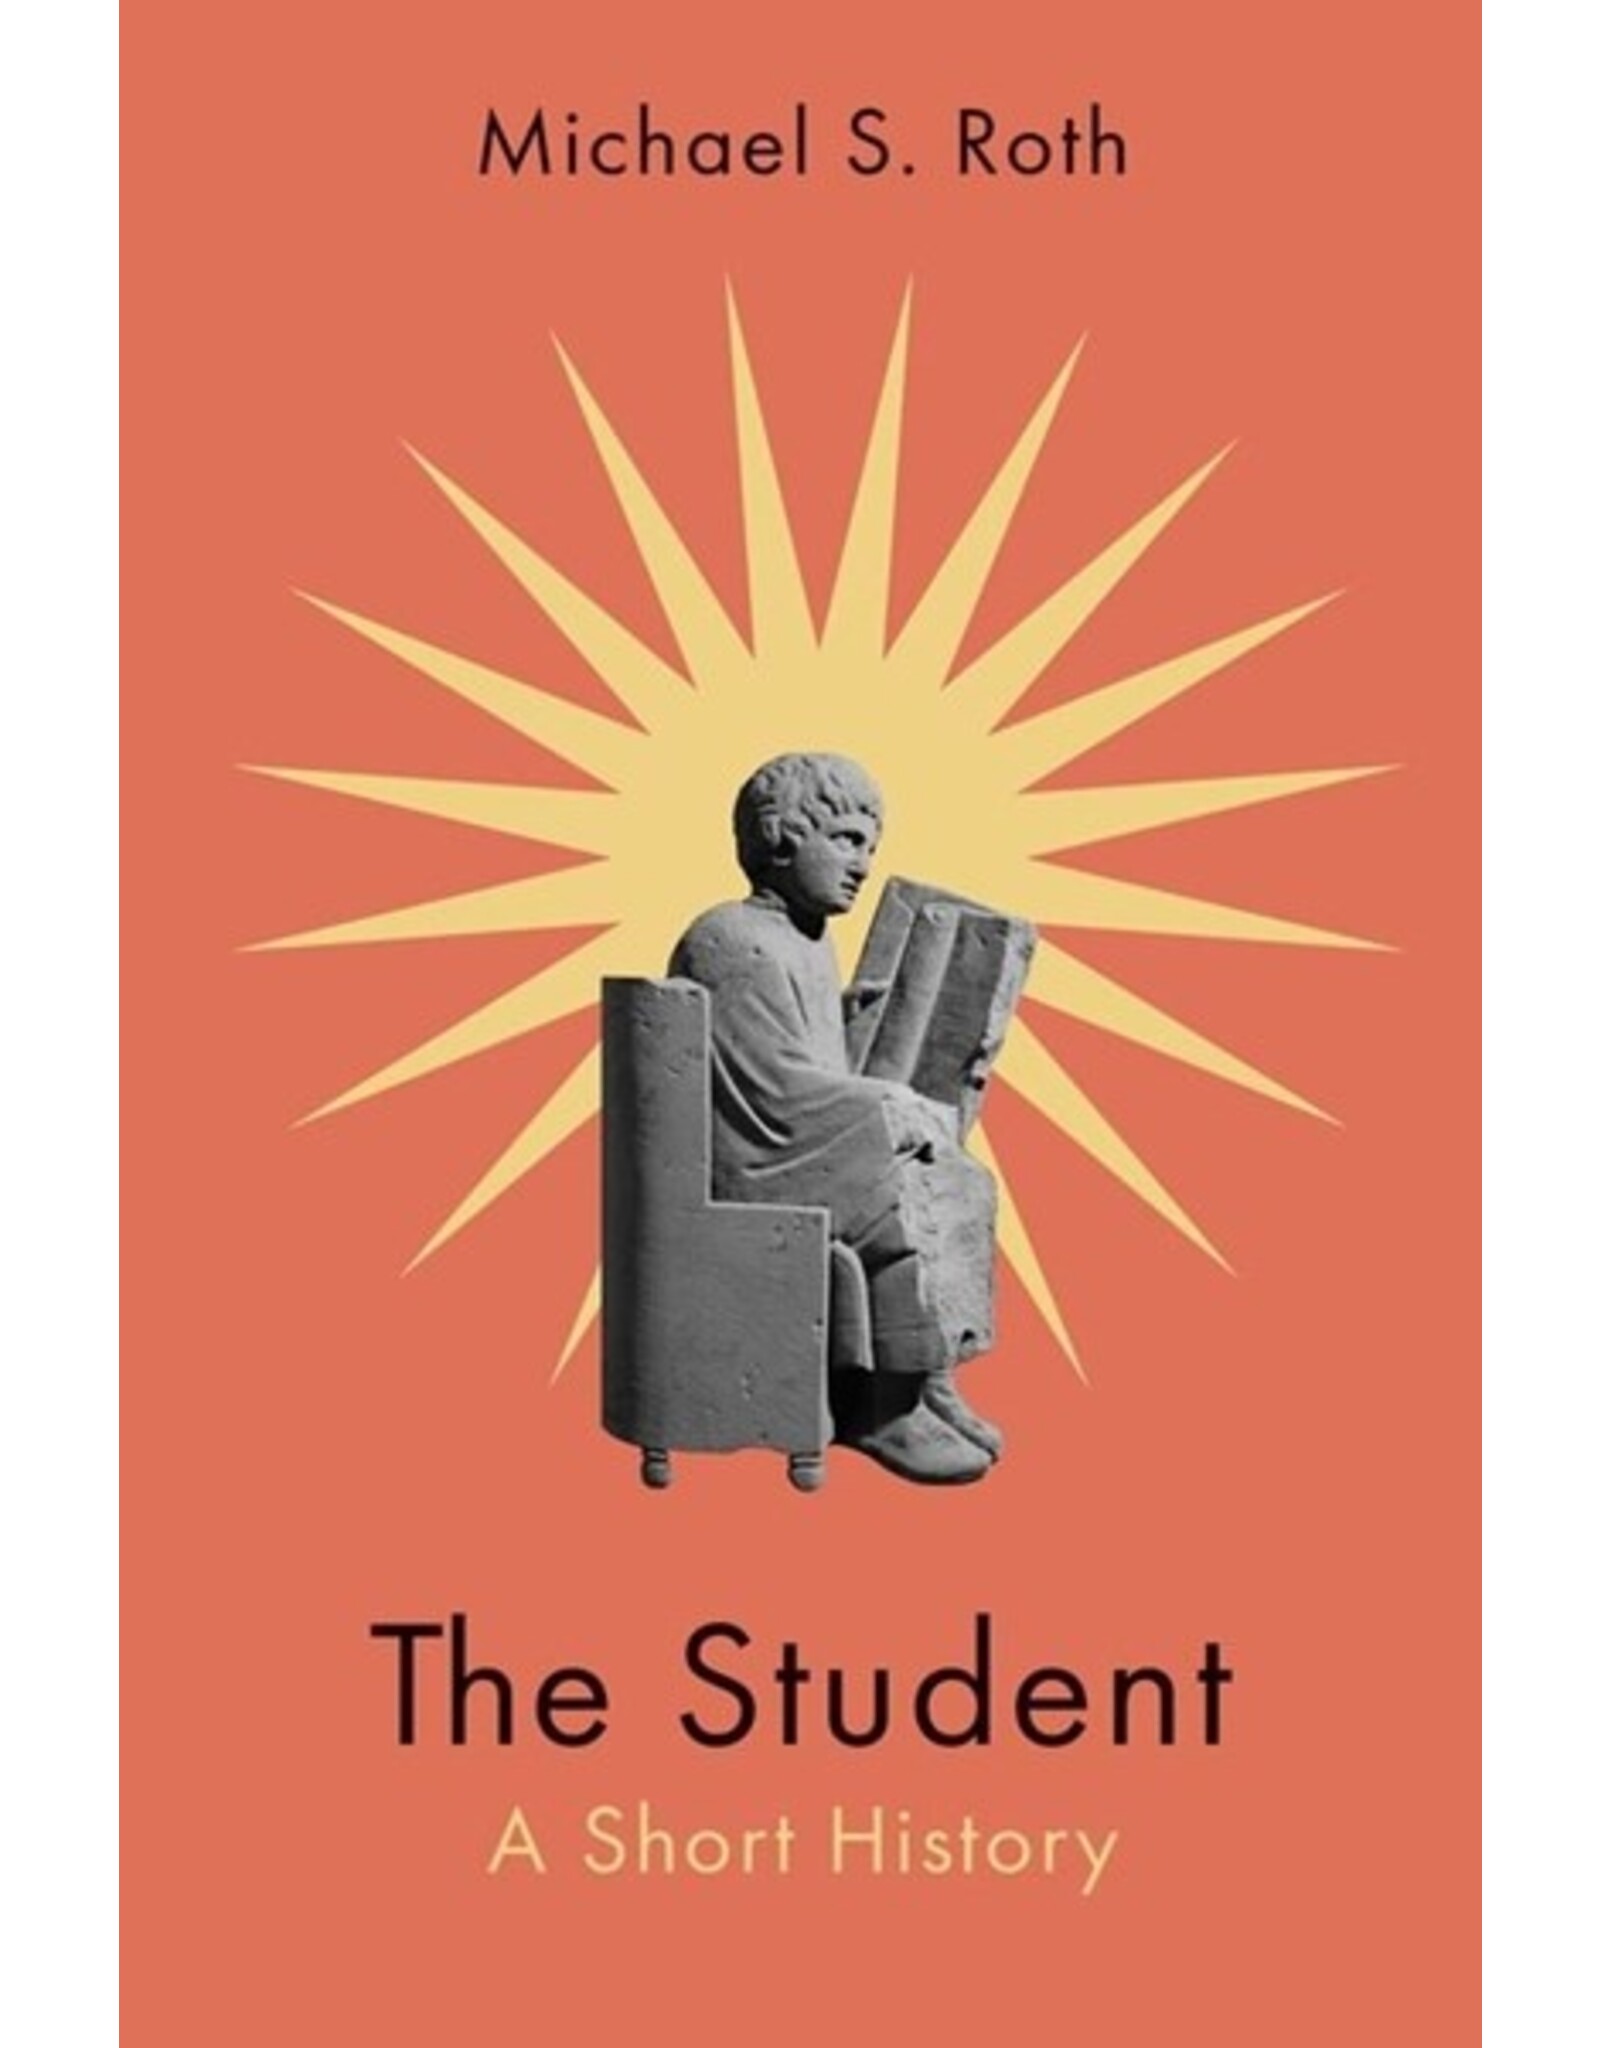 Books The Student: A Short History by Michael S. Roth